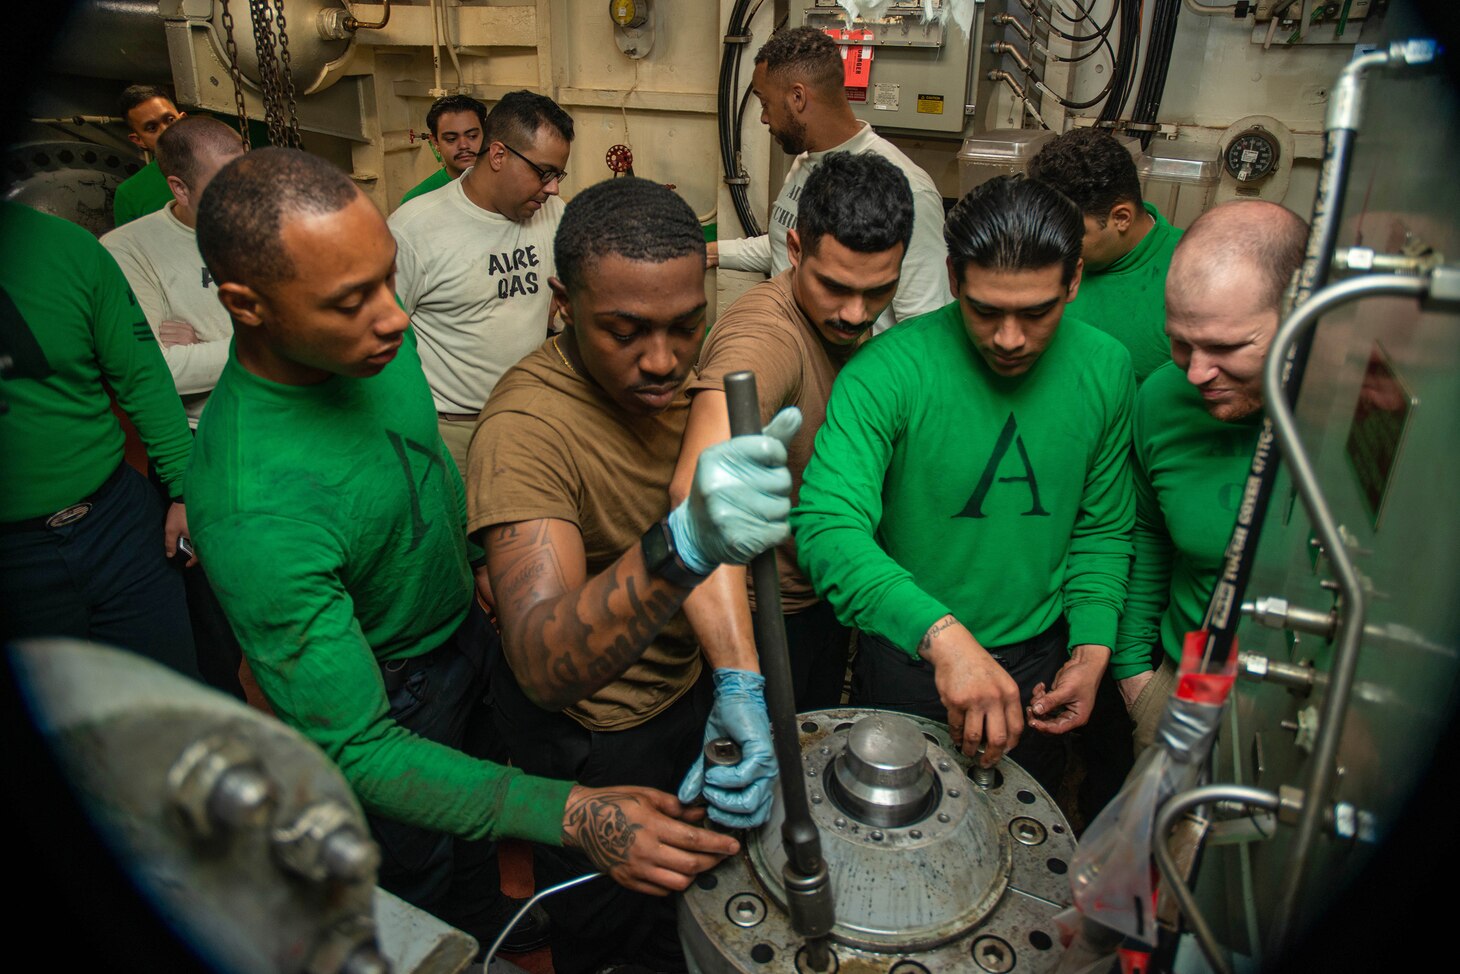 U.S. Navy Sailors disassemble a constant runout valve for maintenance aboard the aircraft carrier USS Nimitz (CVN 68). Nimitz is in U.S. 7th Fleet conducting routine operations. 7th Fleet is the U.S. Navy's largest forward-deployed numbered fleet, and routinely interacts and operates with Allies and partners in preserving a free and open Indo-Pacific region.